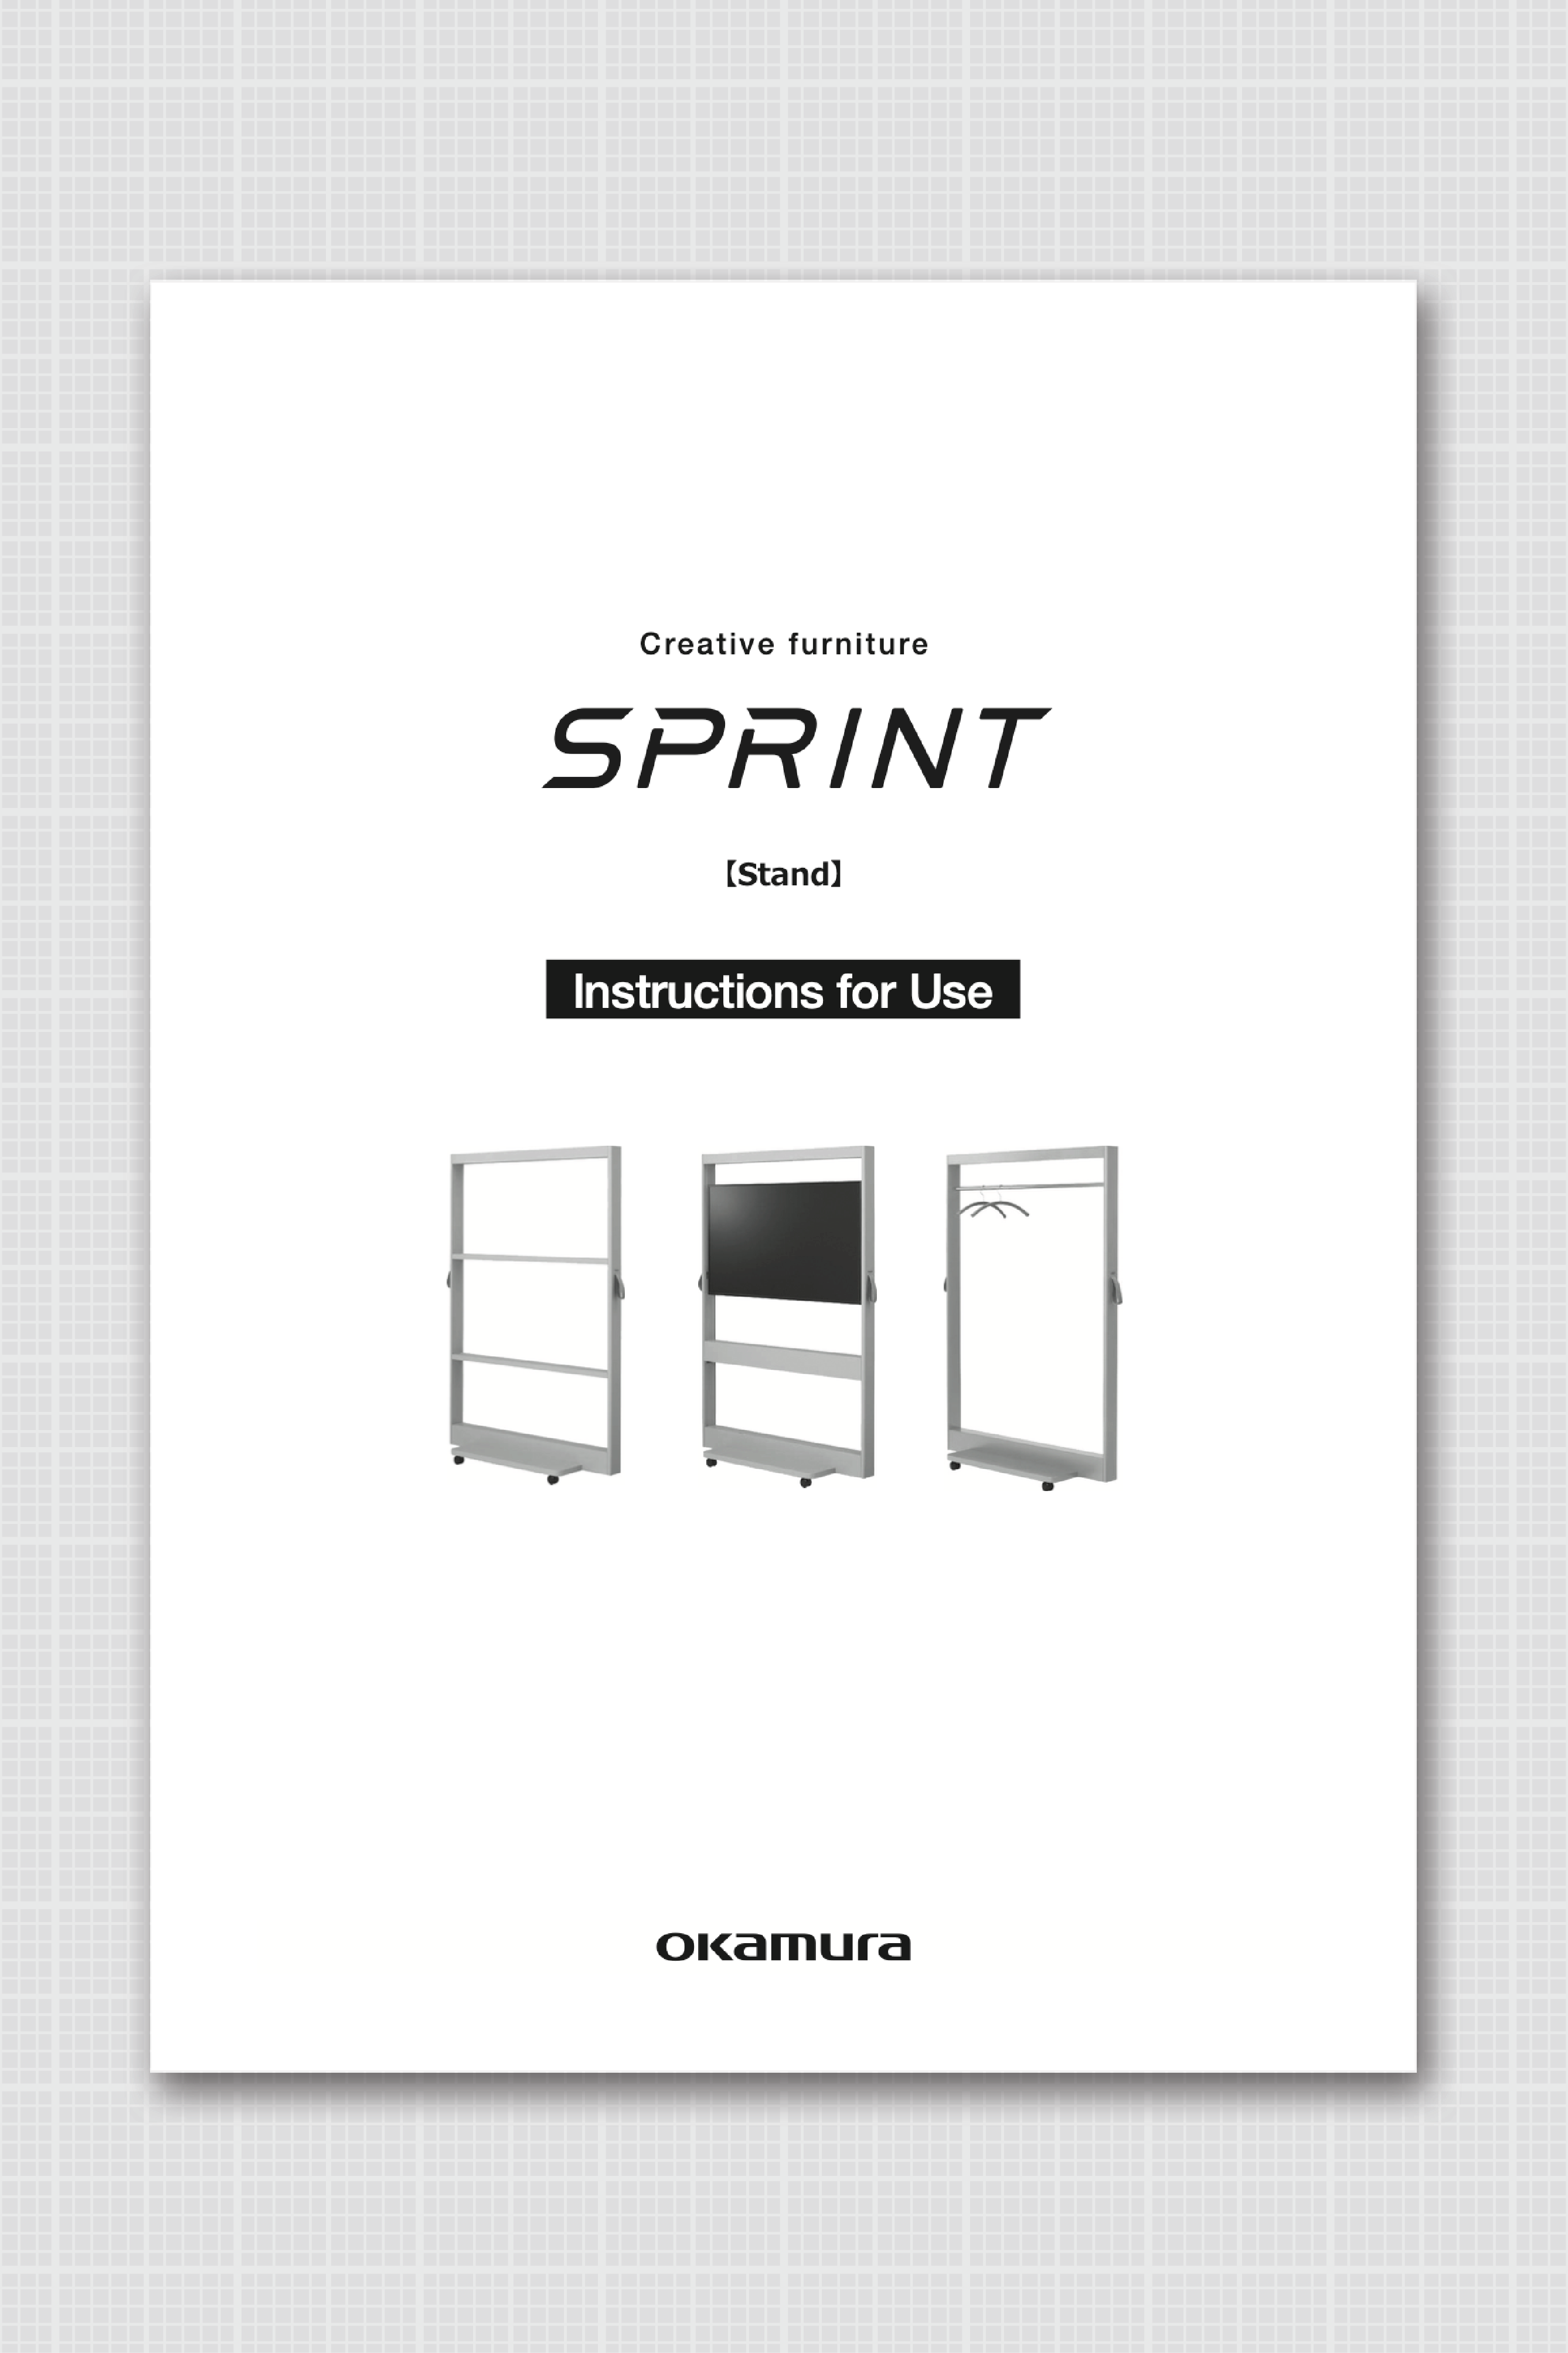 SPRINT Instrucitons for Use